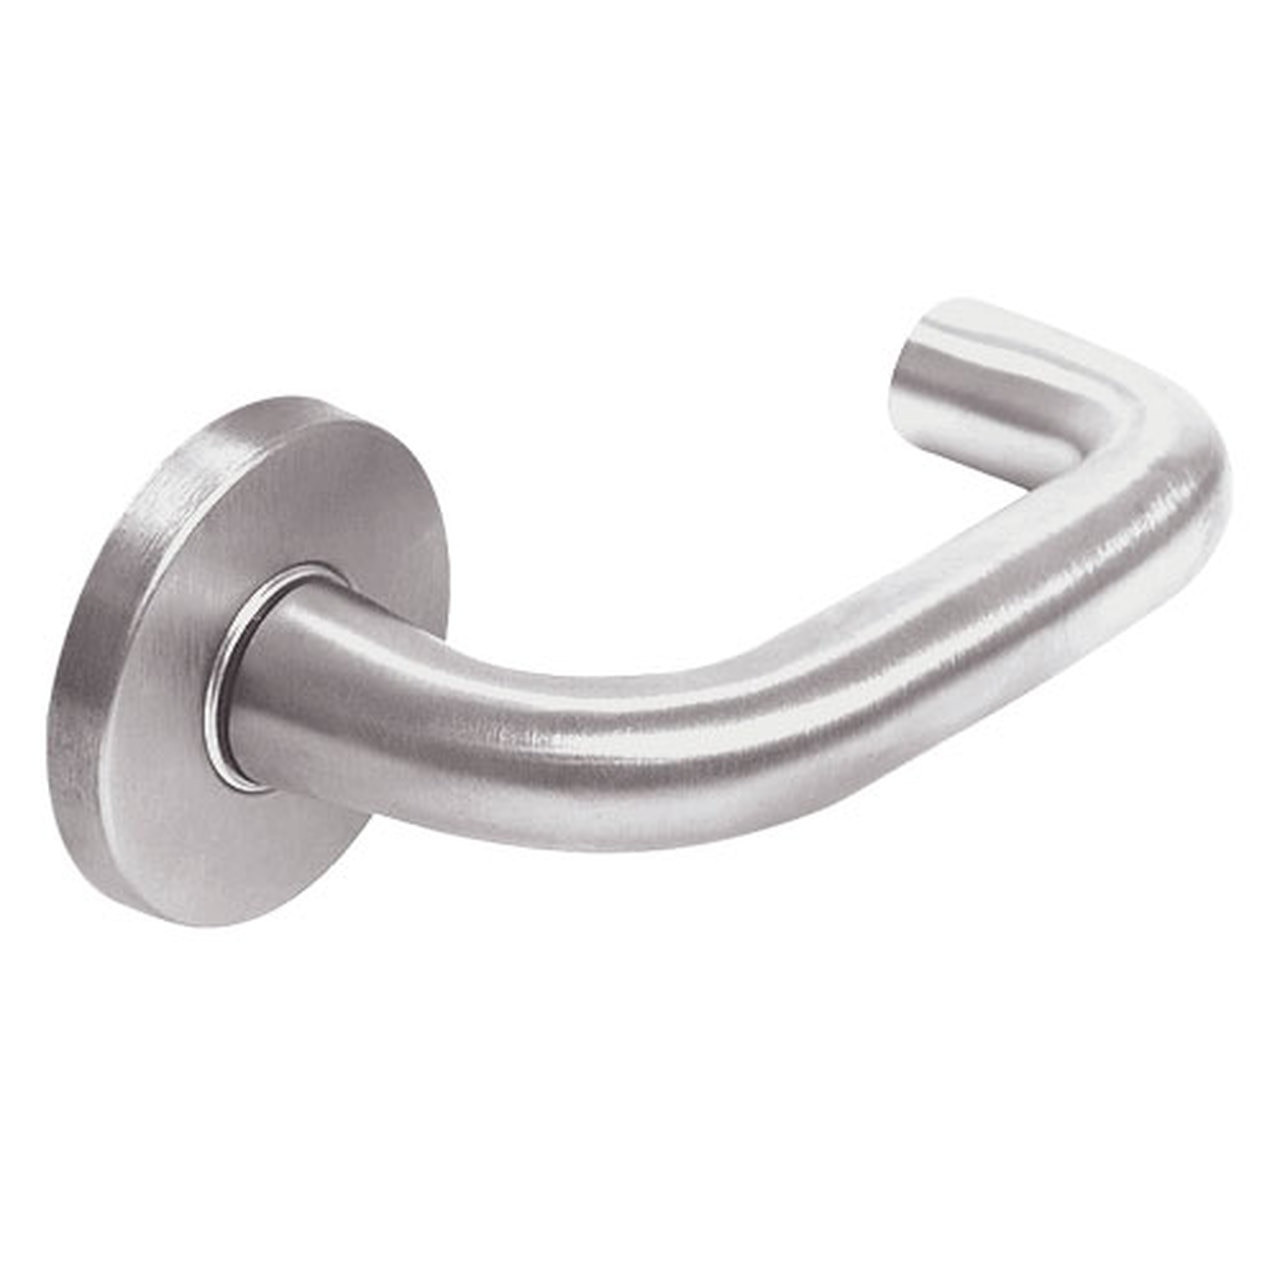 ML2054-LSA-630-M31 Corbin Russwin ML2000 Series Mortise Entrance Trim Pack with Lustra Lever in Satin Stainless